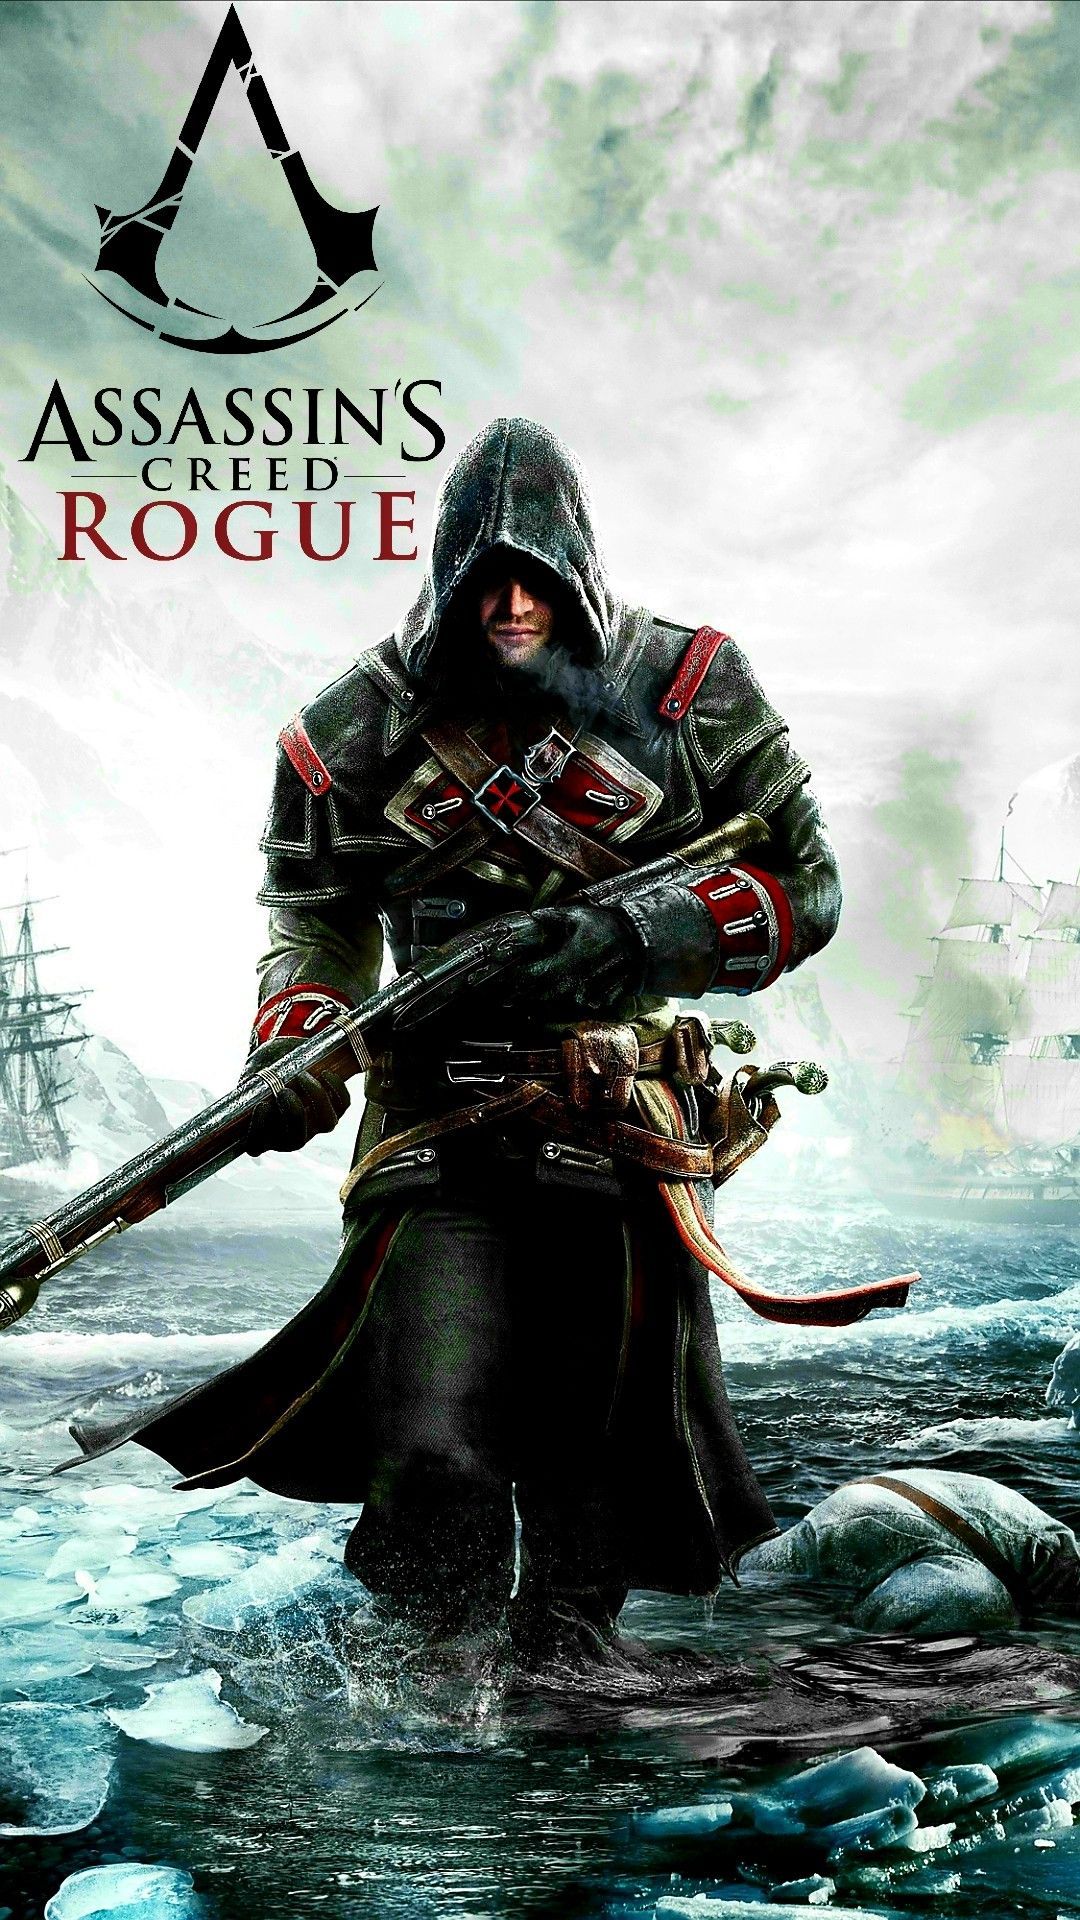 Assassin Creed Rogue wallpaper for iPhone 6 plus and other devices - Rogue